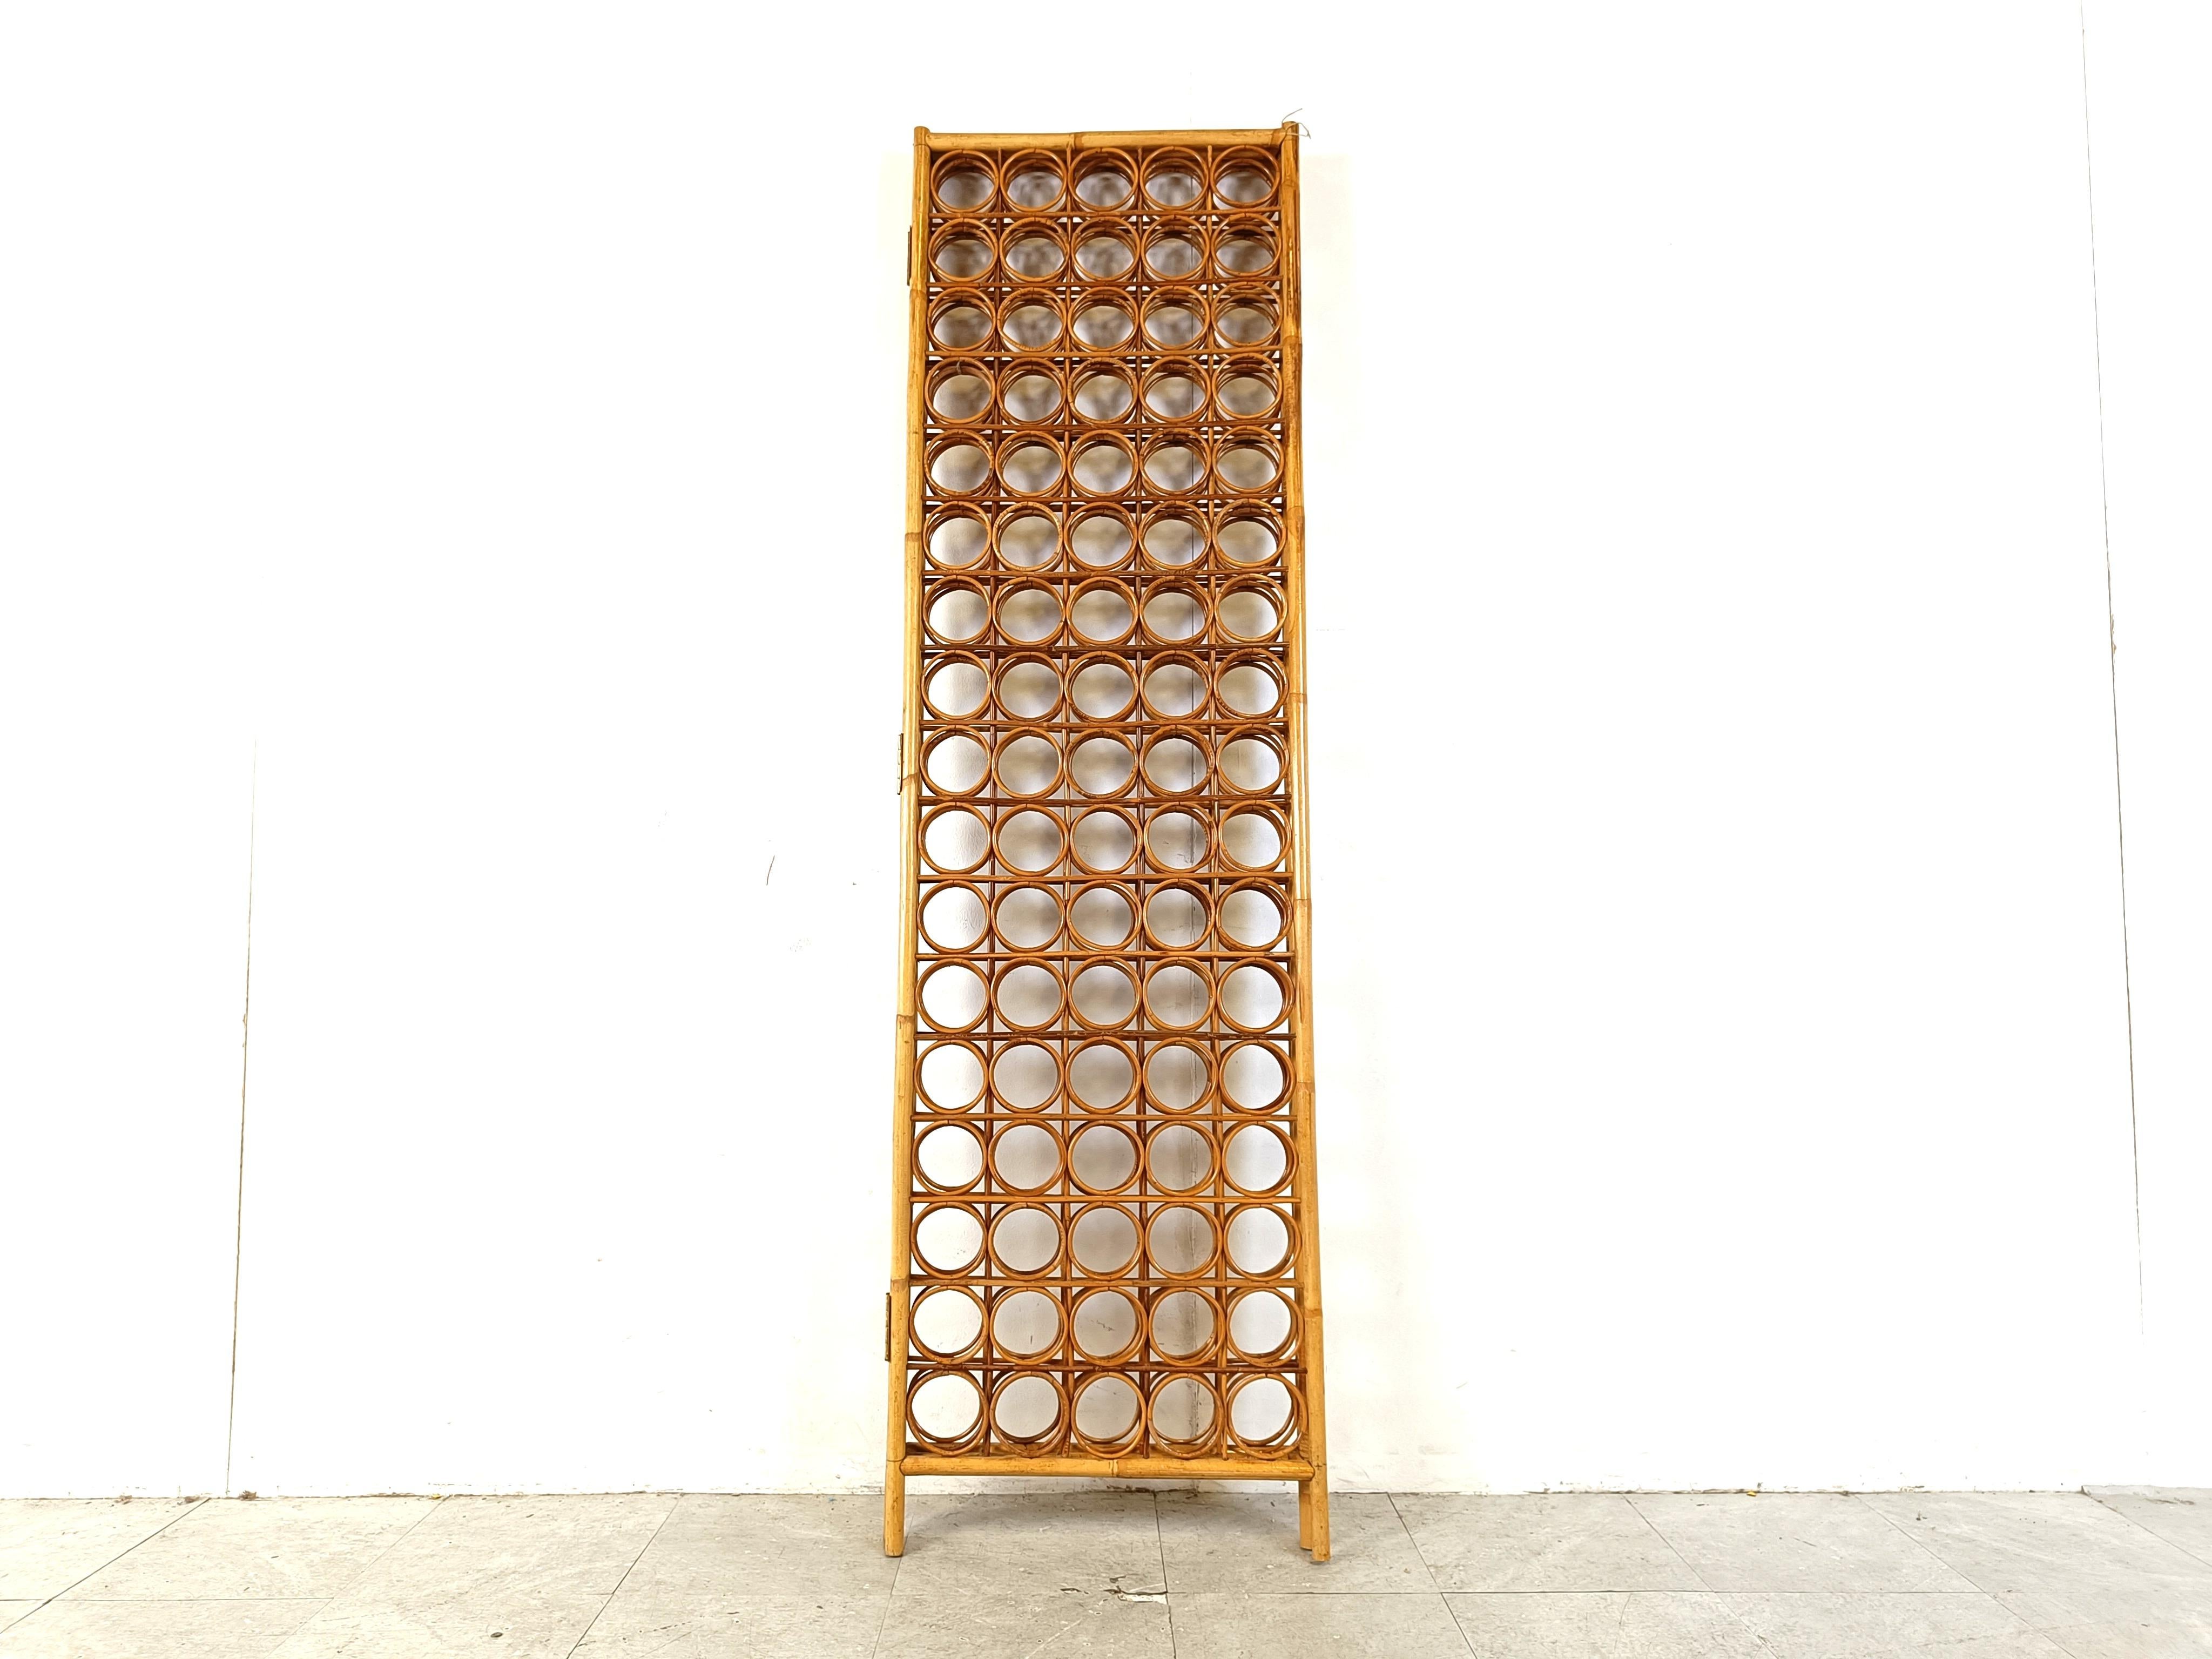 Bamboo folding screen/room divider.

3 screen folding paravent with bamboo circles.

Good condition

1970s 

Height: 180cm
Width 155cm

Ref.: 107380
